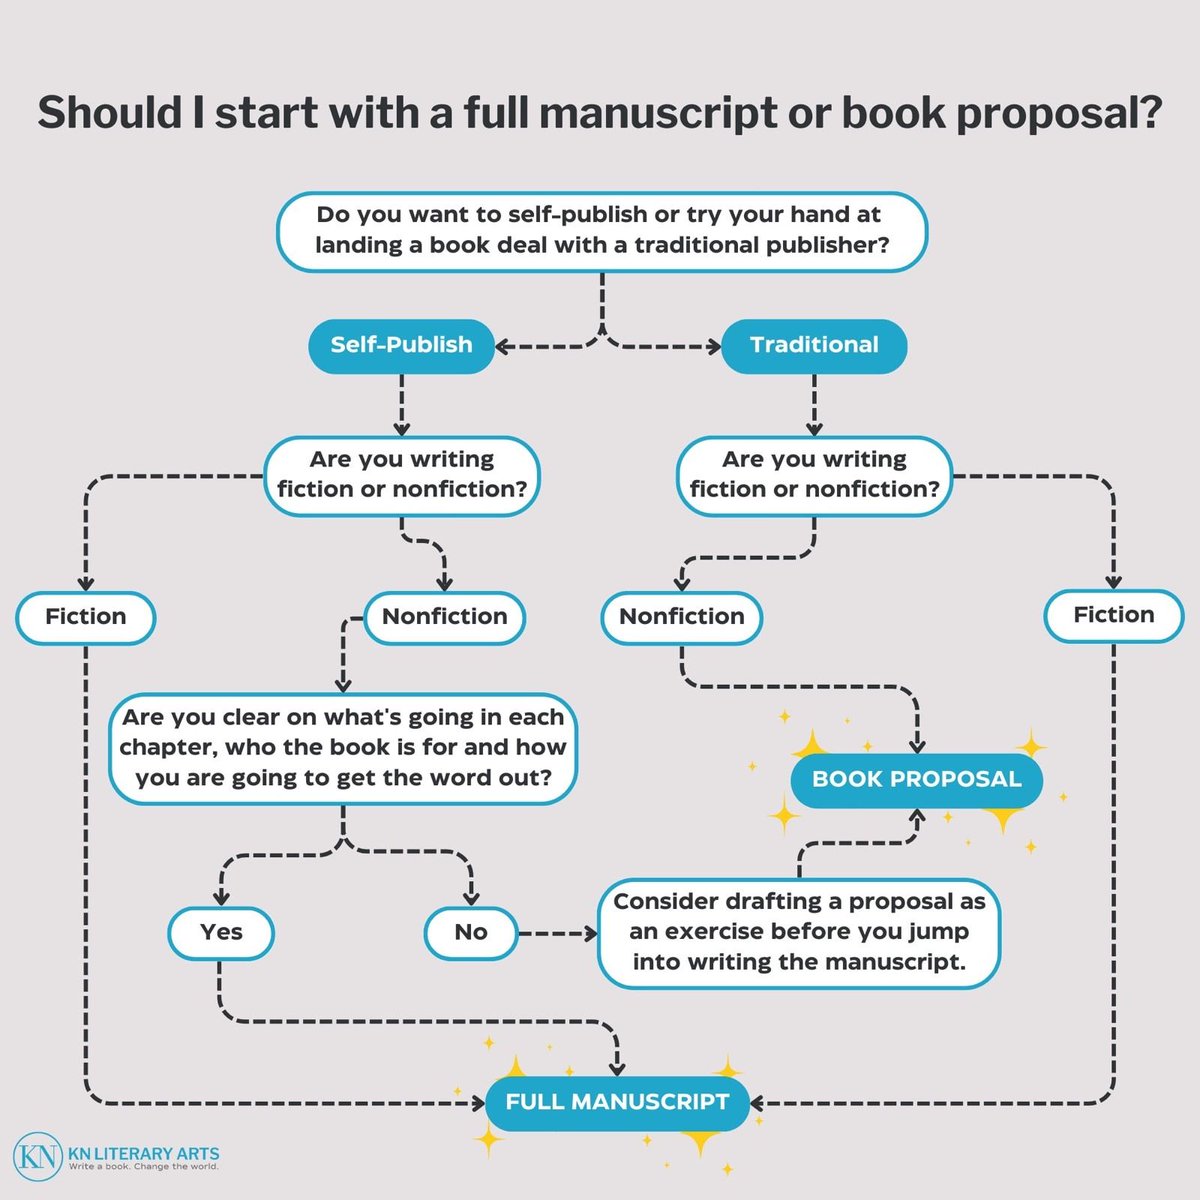 #Protip: If you are planning to #selfpublish a #book, you may still consider writing a book proposal #infographic #chart buff.ly/3PuFc3y